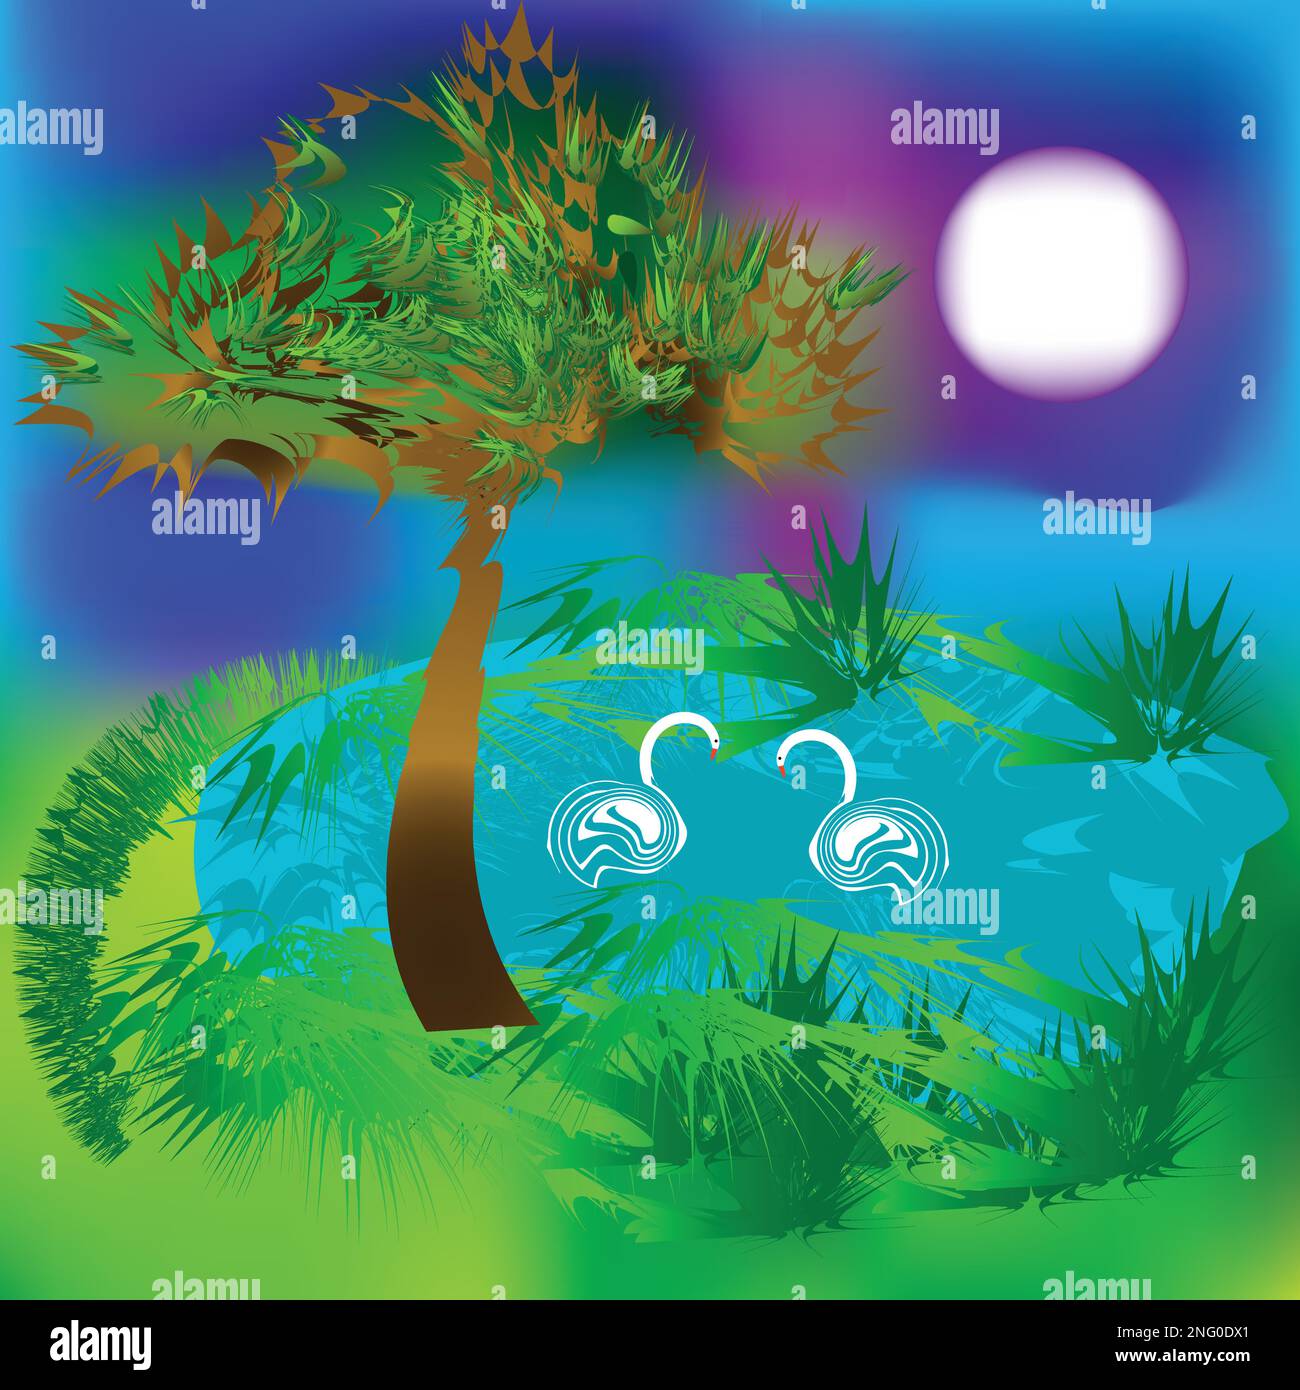 Abstract illustration  landscape with tree, lake and swans Stock Vector